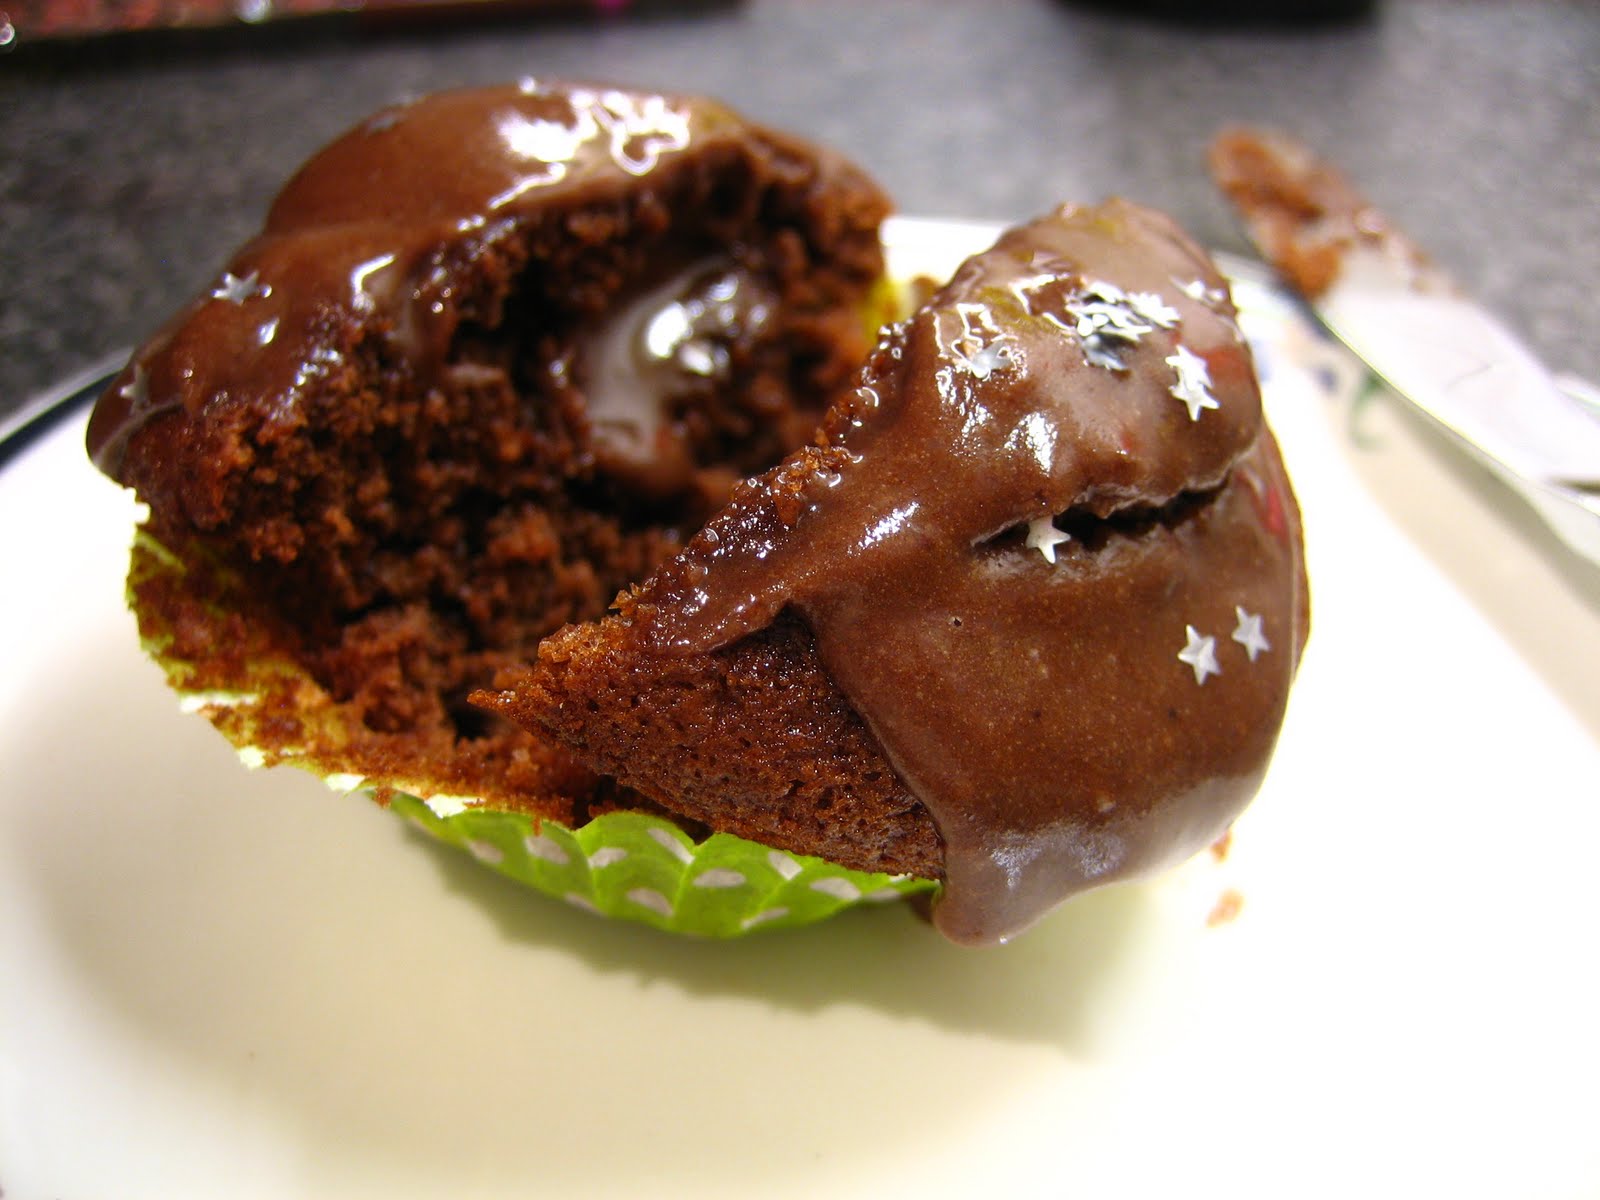 Chocolate Cupcakes with Pudding Filling